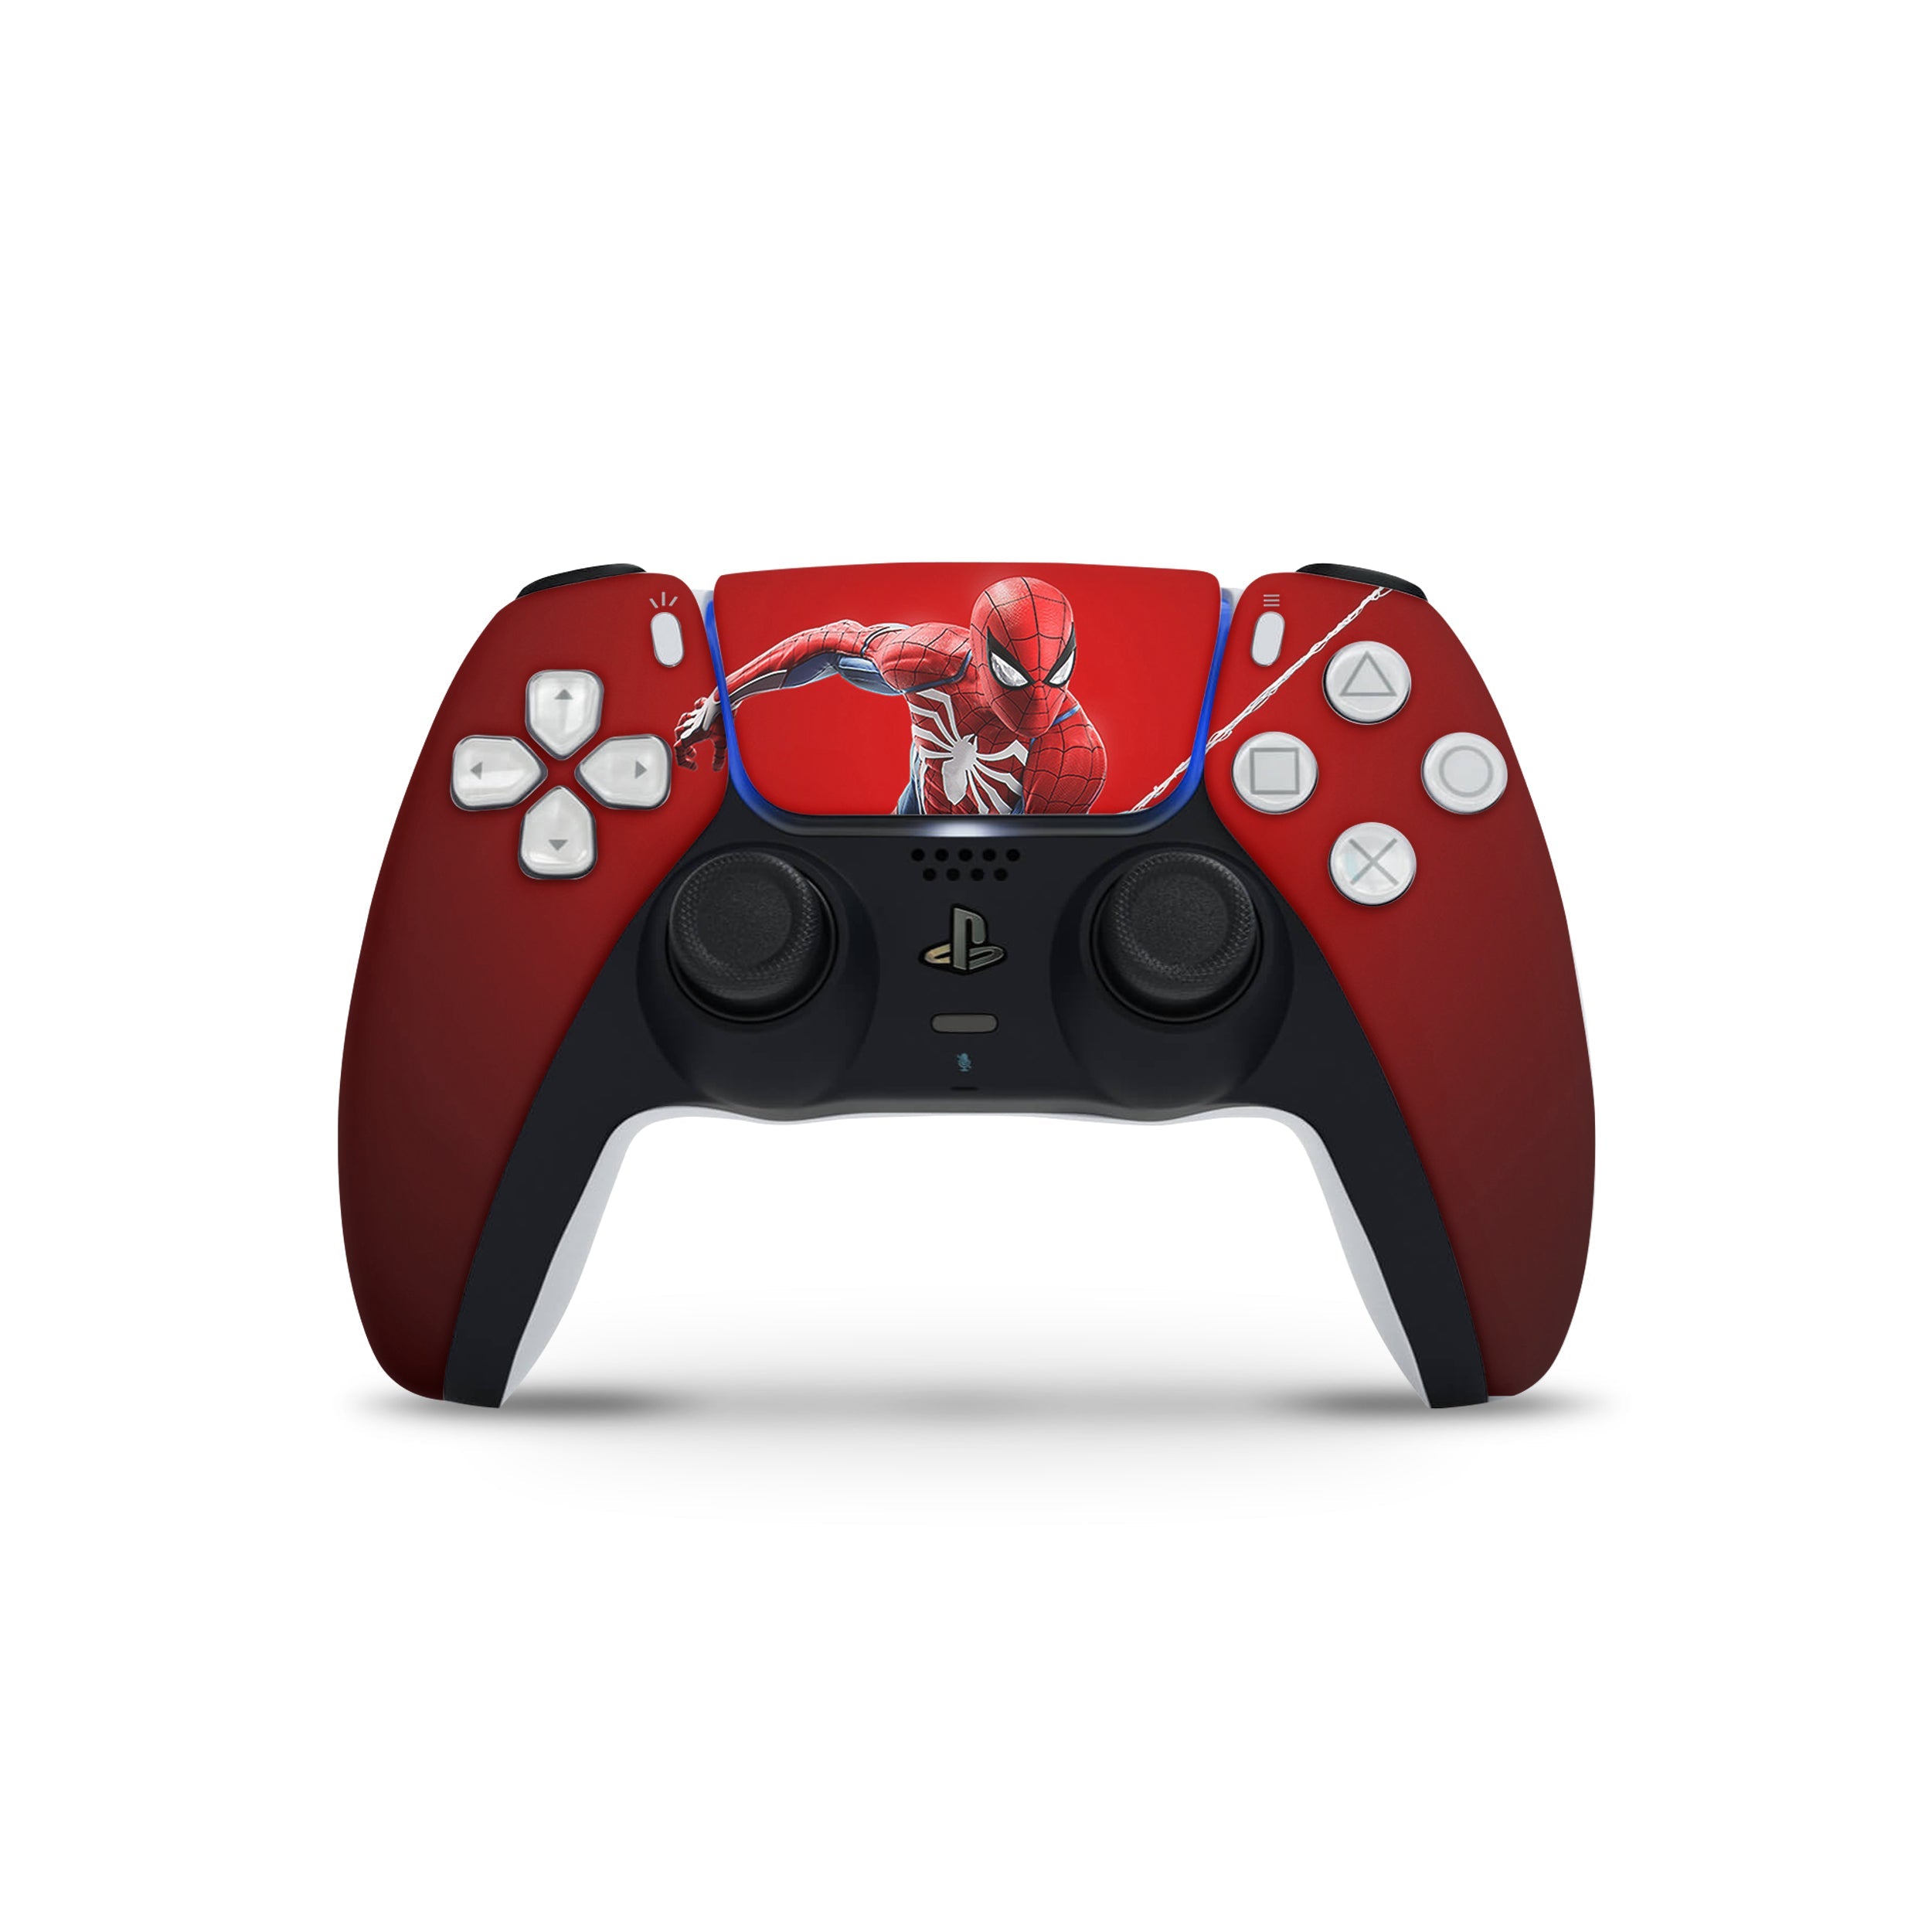 A video game skin featuring a Marvel Spiderman design for the PS5 DualSense Controller.